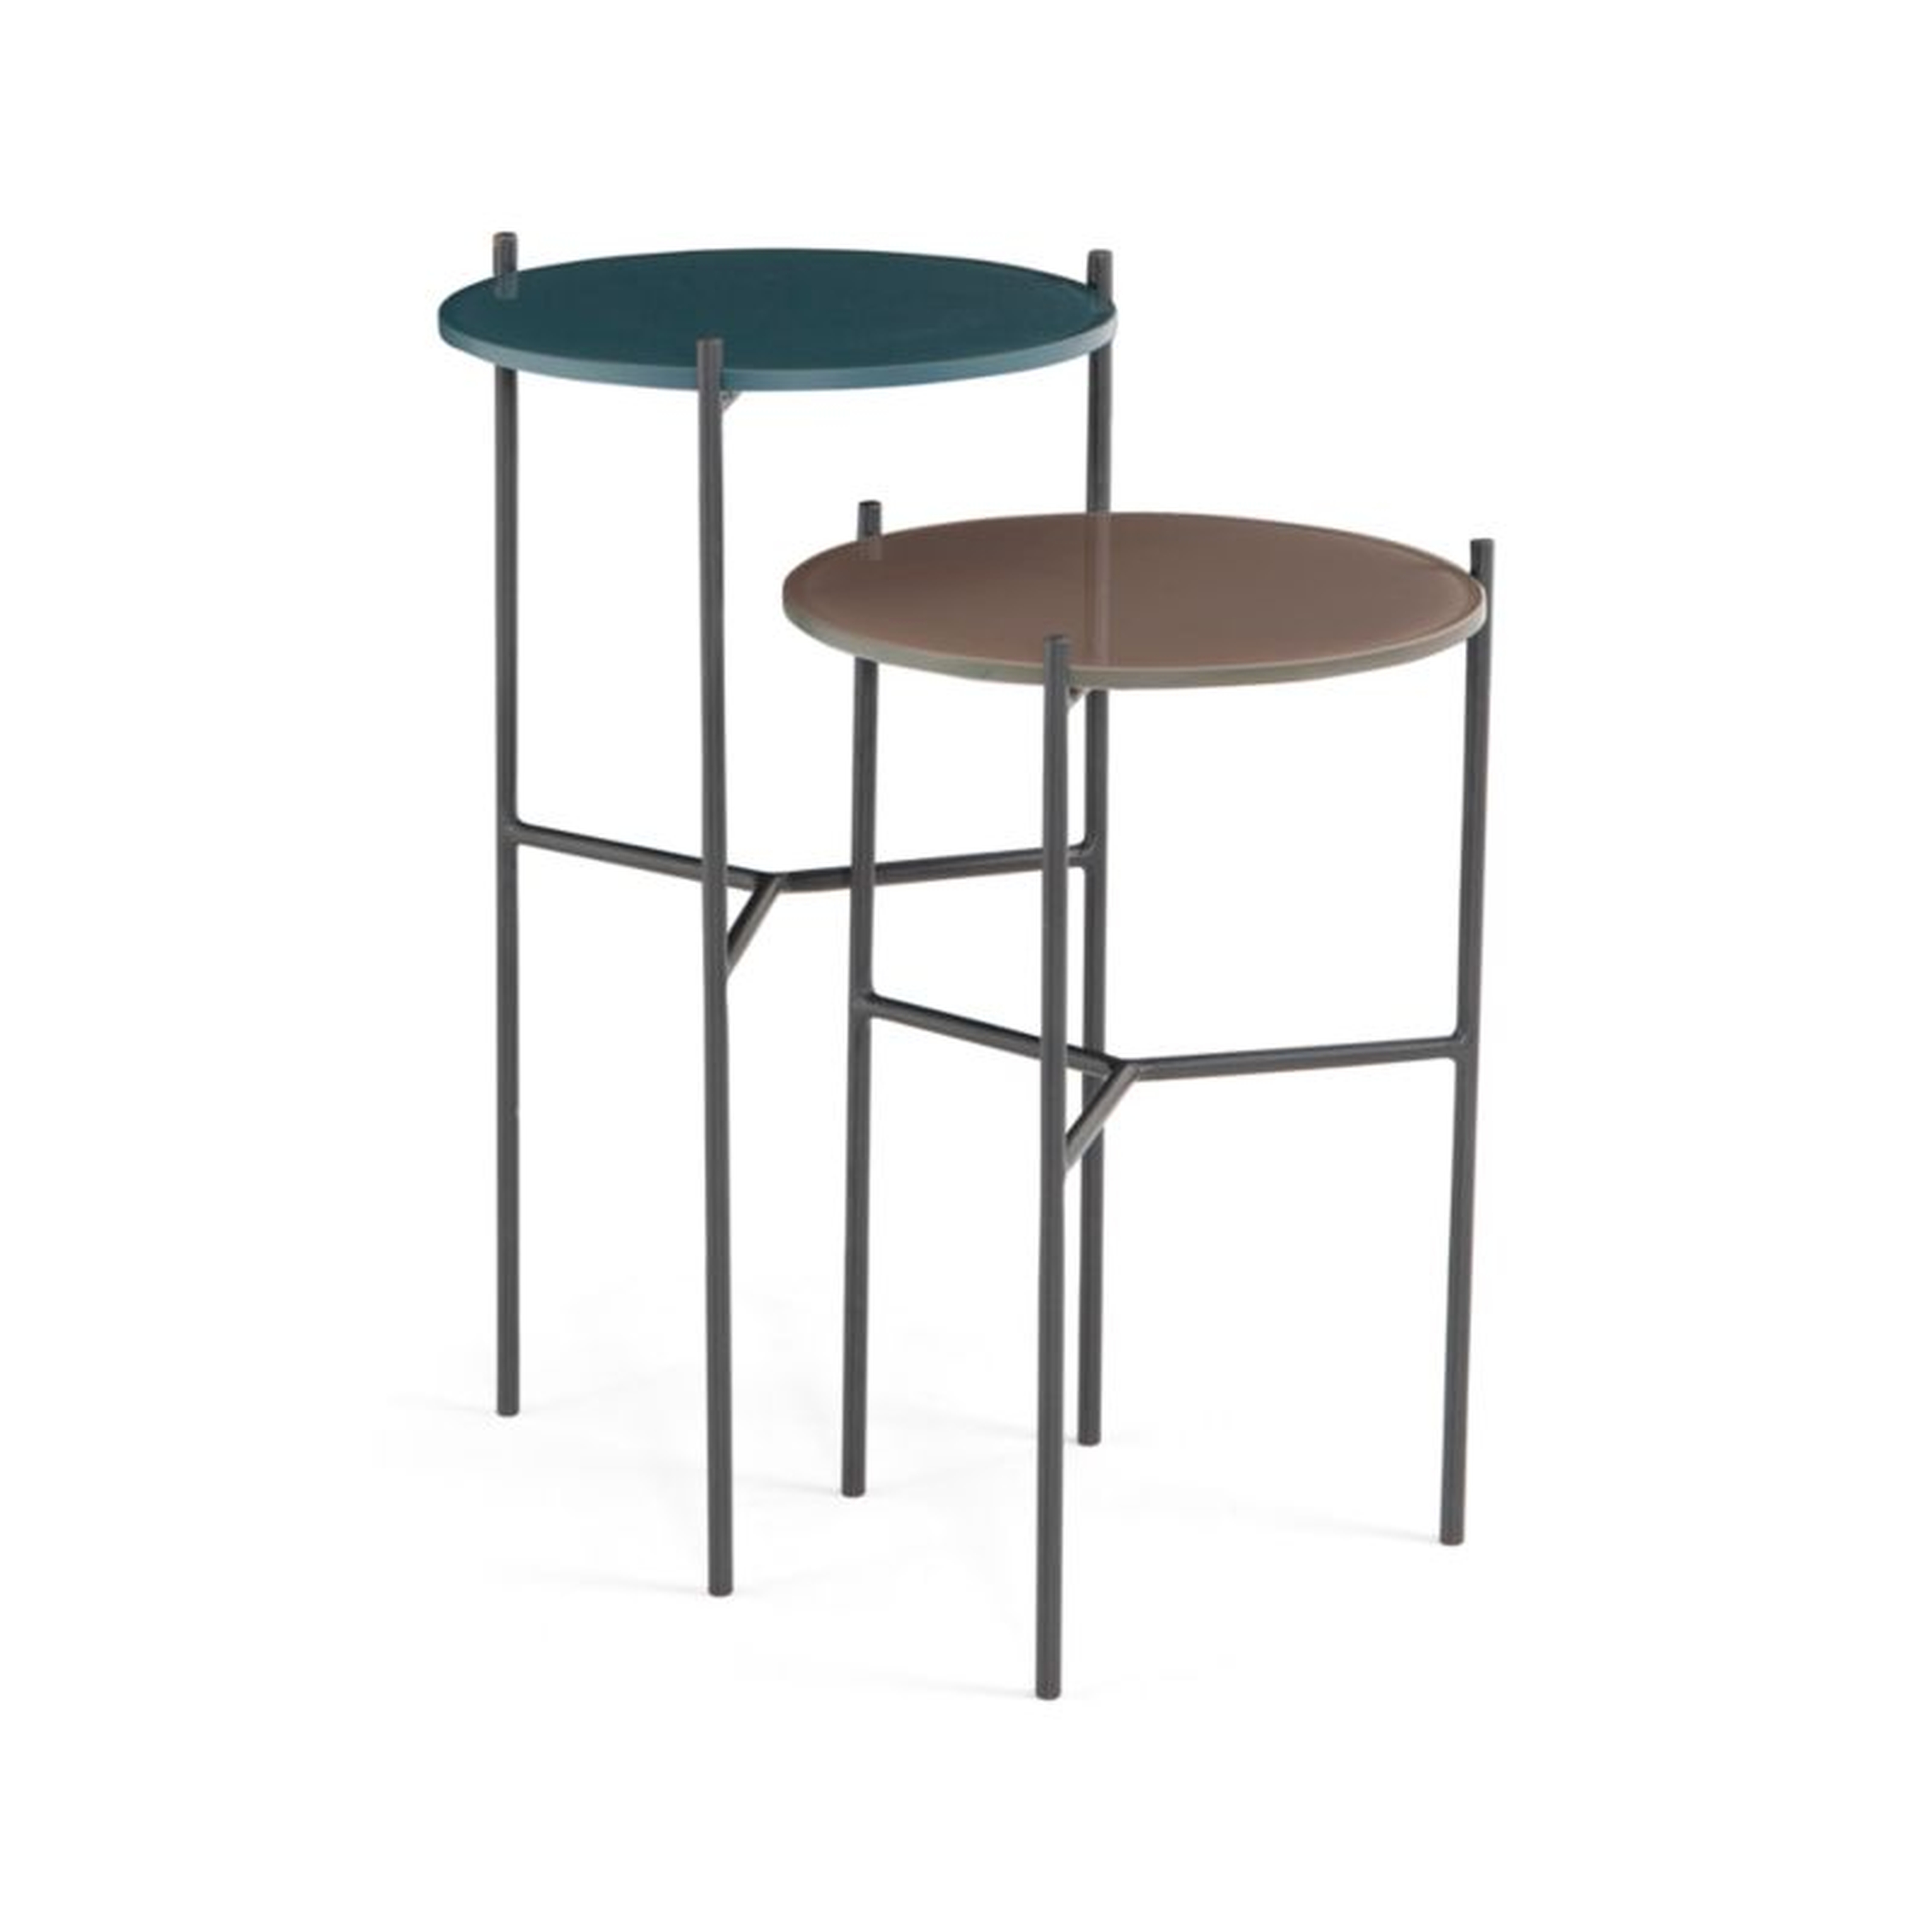 Maylan Painted Glass End Tables, Set of 2 - Crate and Barrel